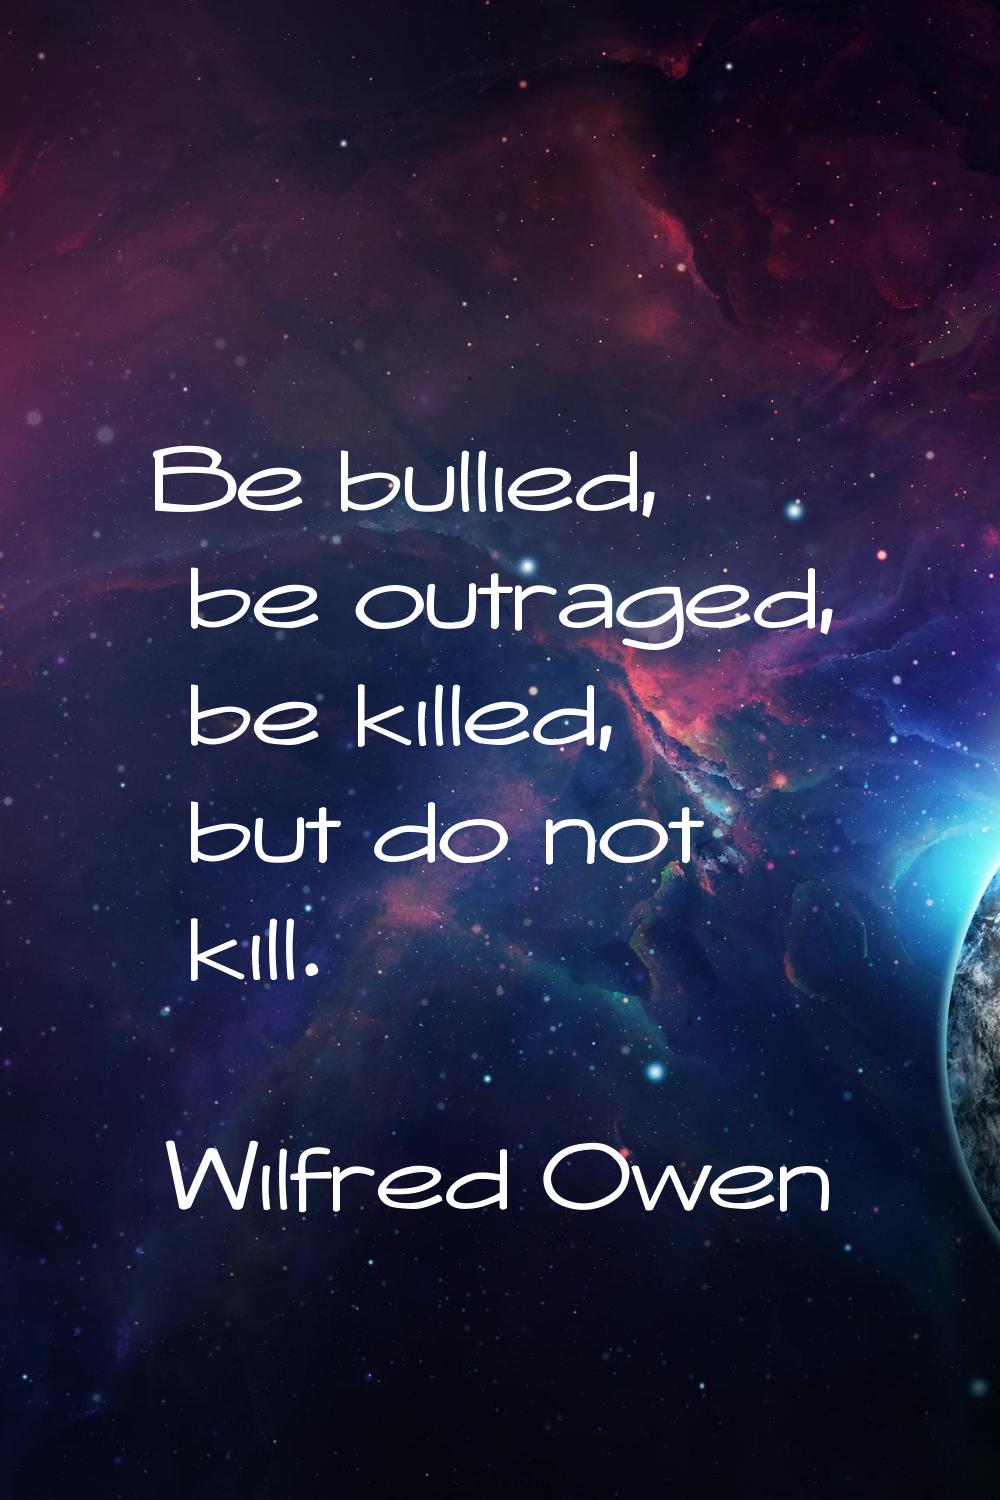 Be bullied, be outraged, be killed, but do not kill.